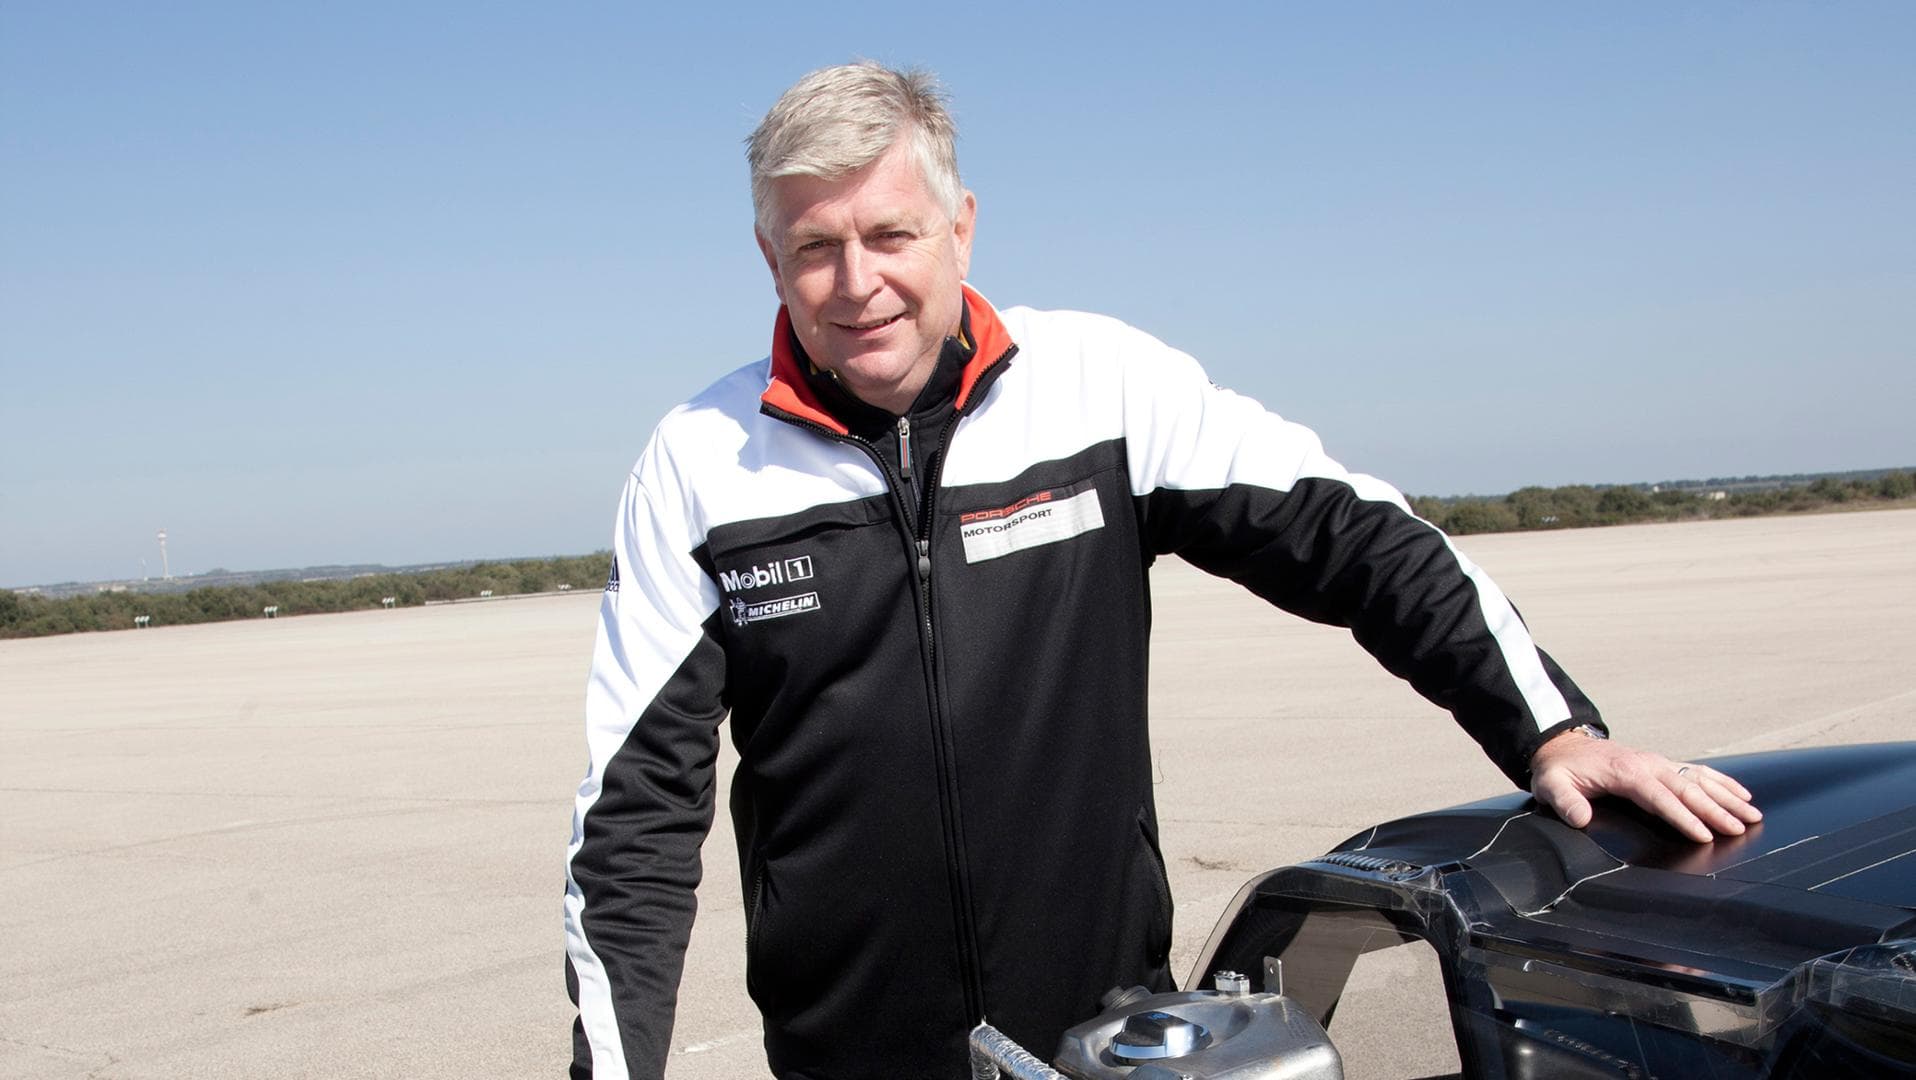 Did You Know Wolfgang Hatz, Father of the Porsche 918 Spyder and 919 Hybrid, Is Still in Jail?